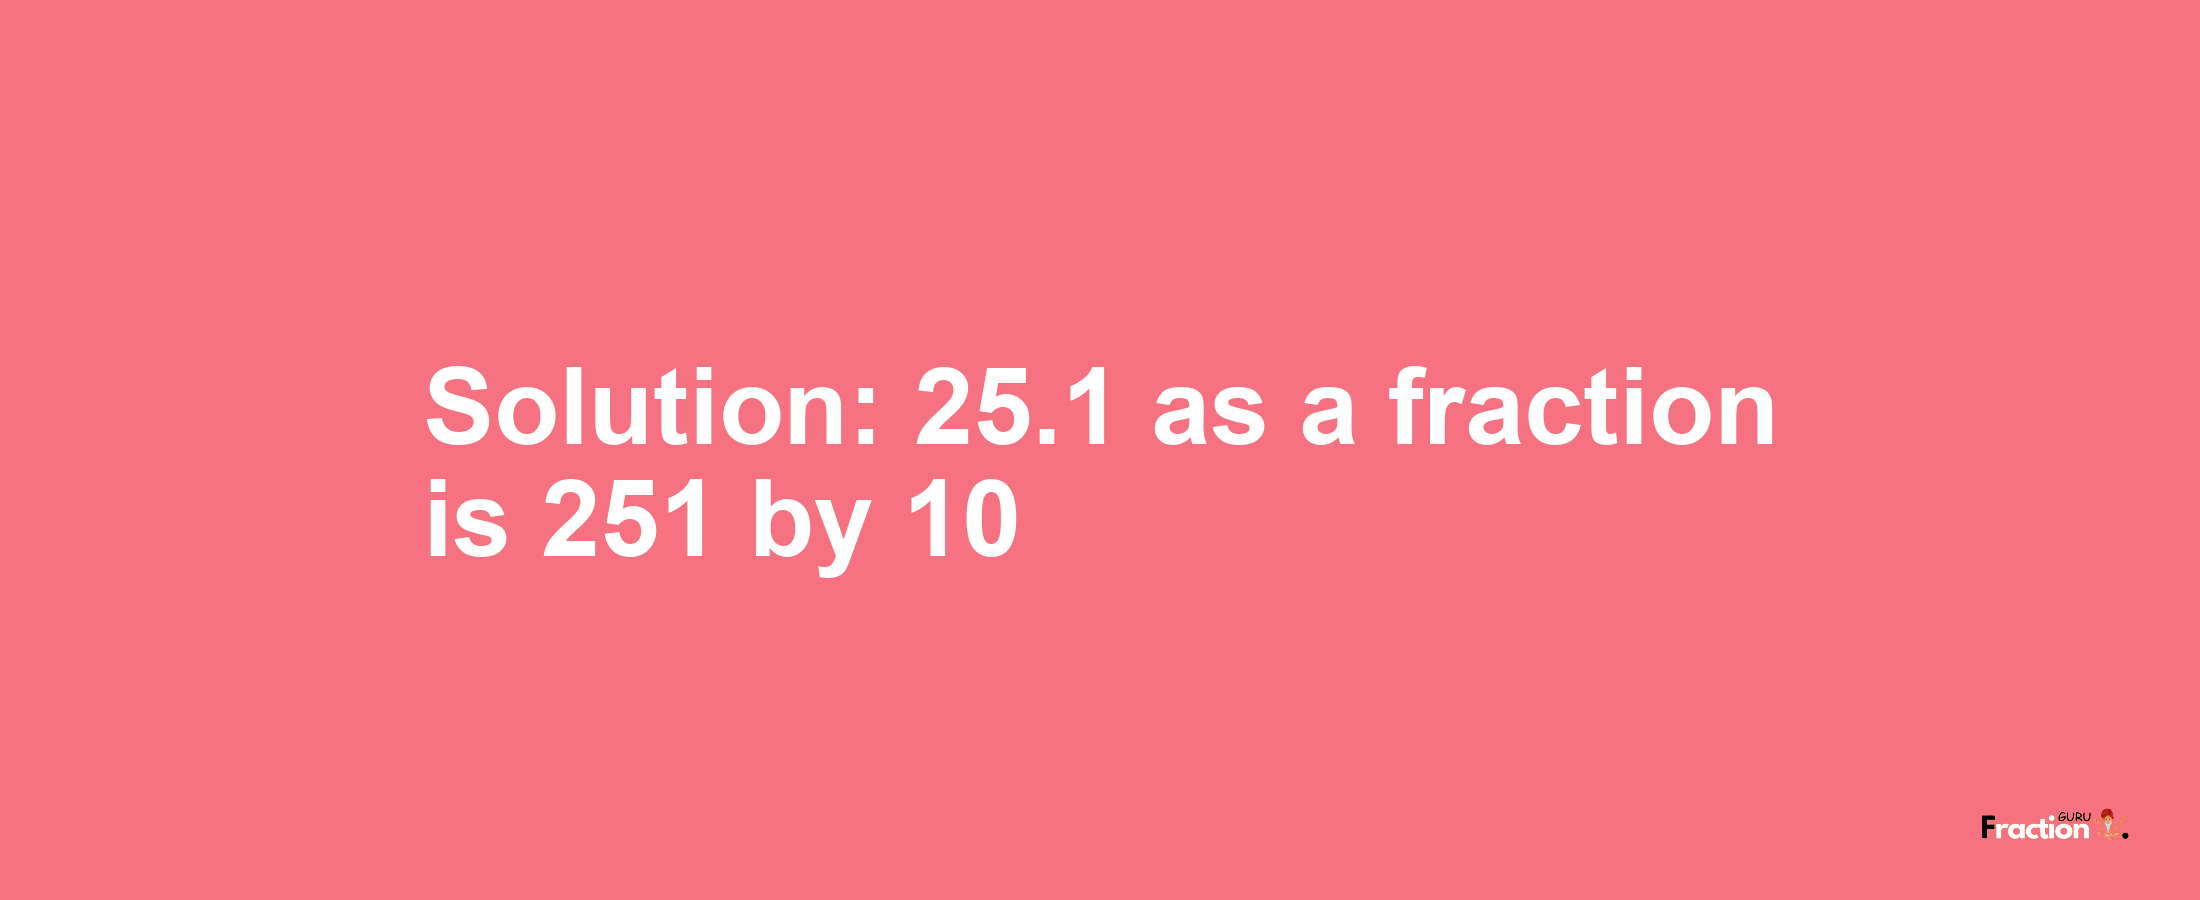 Solution:25.1 as a fraction is 251/10